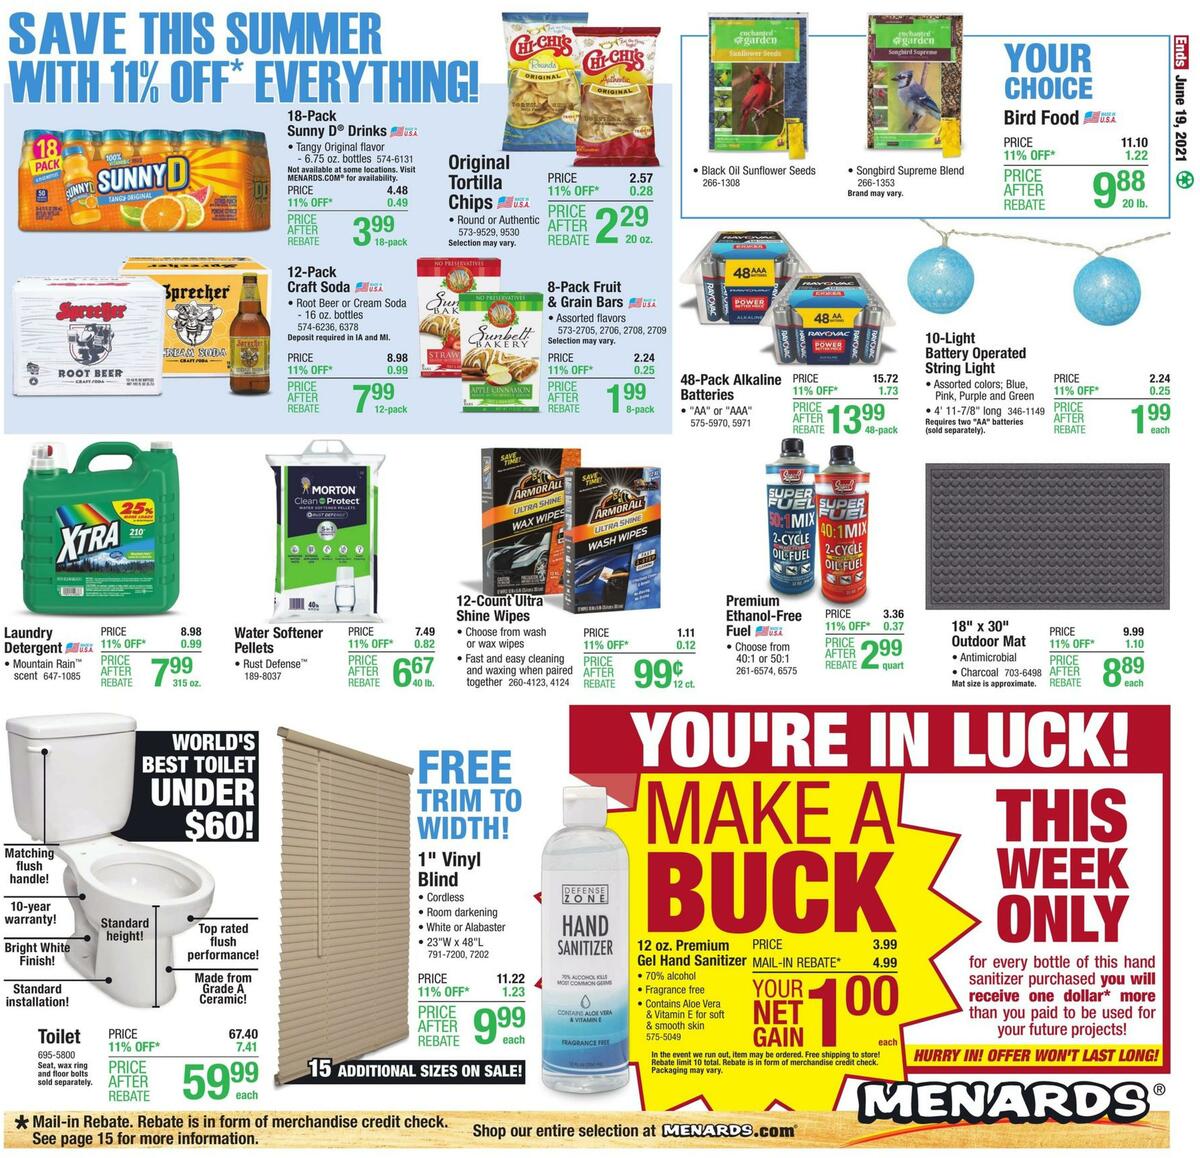 Menards Weekly Ad from June 10